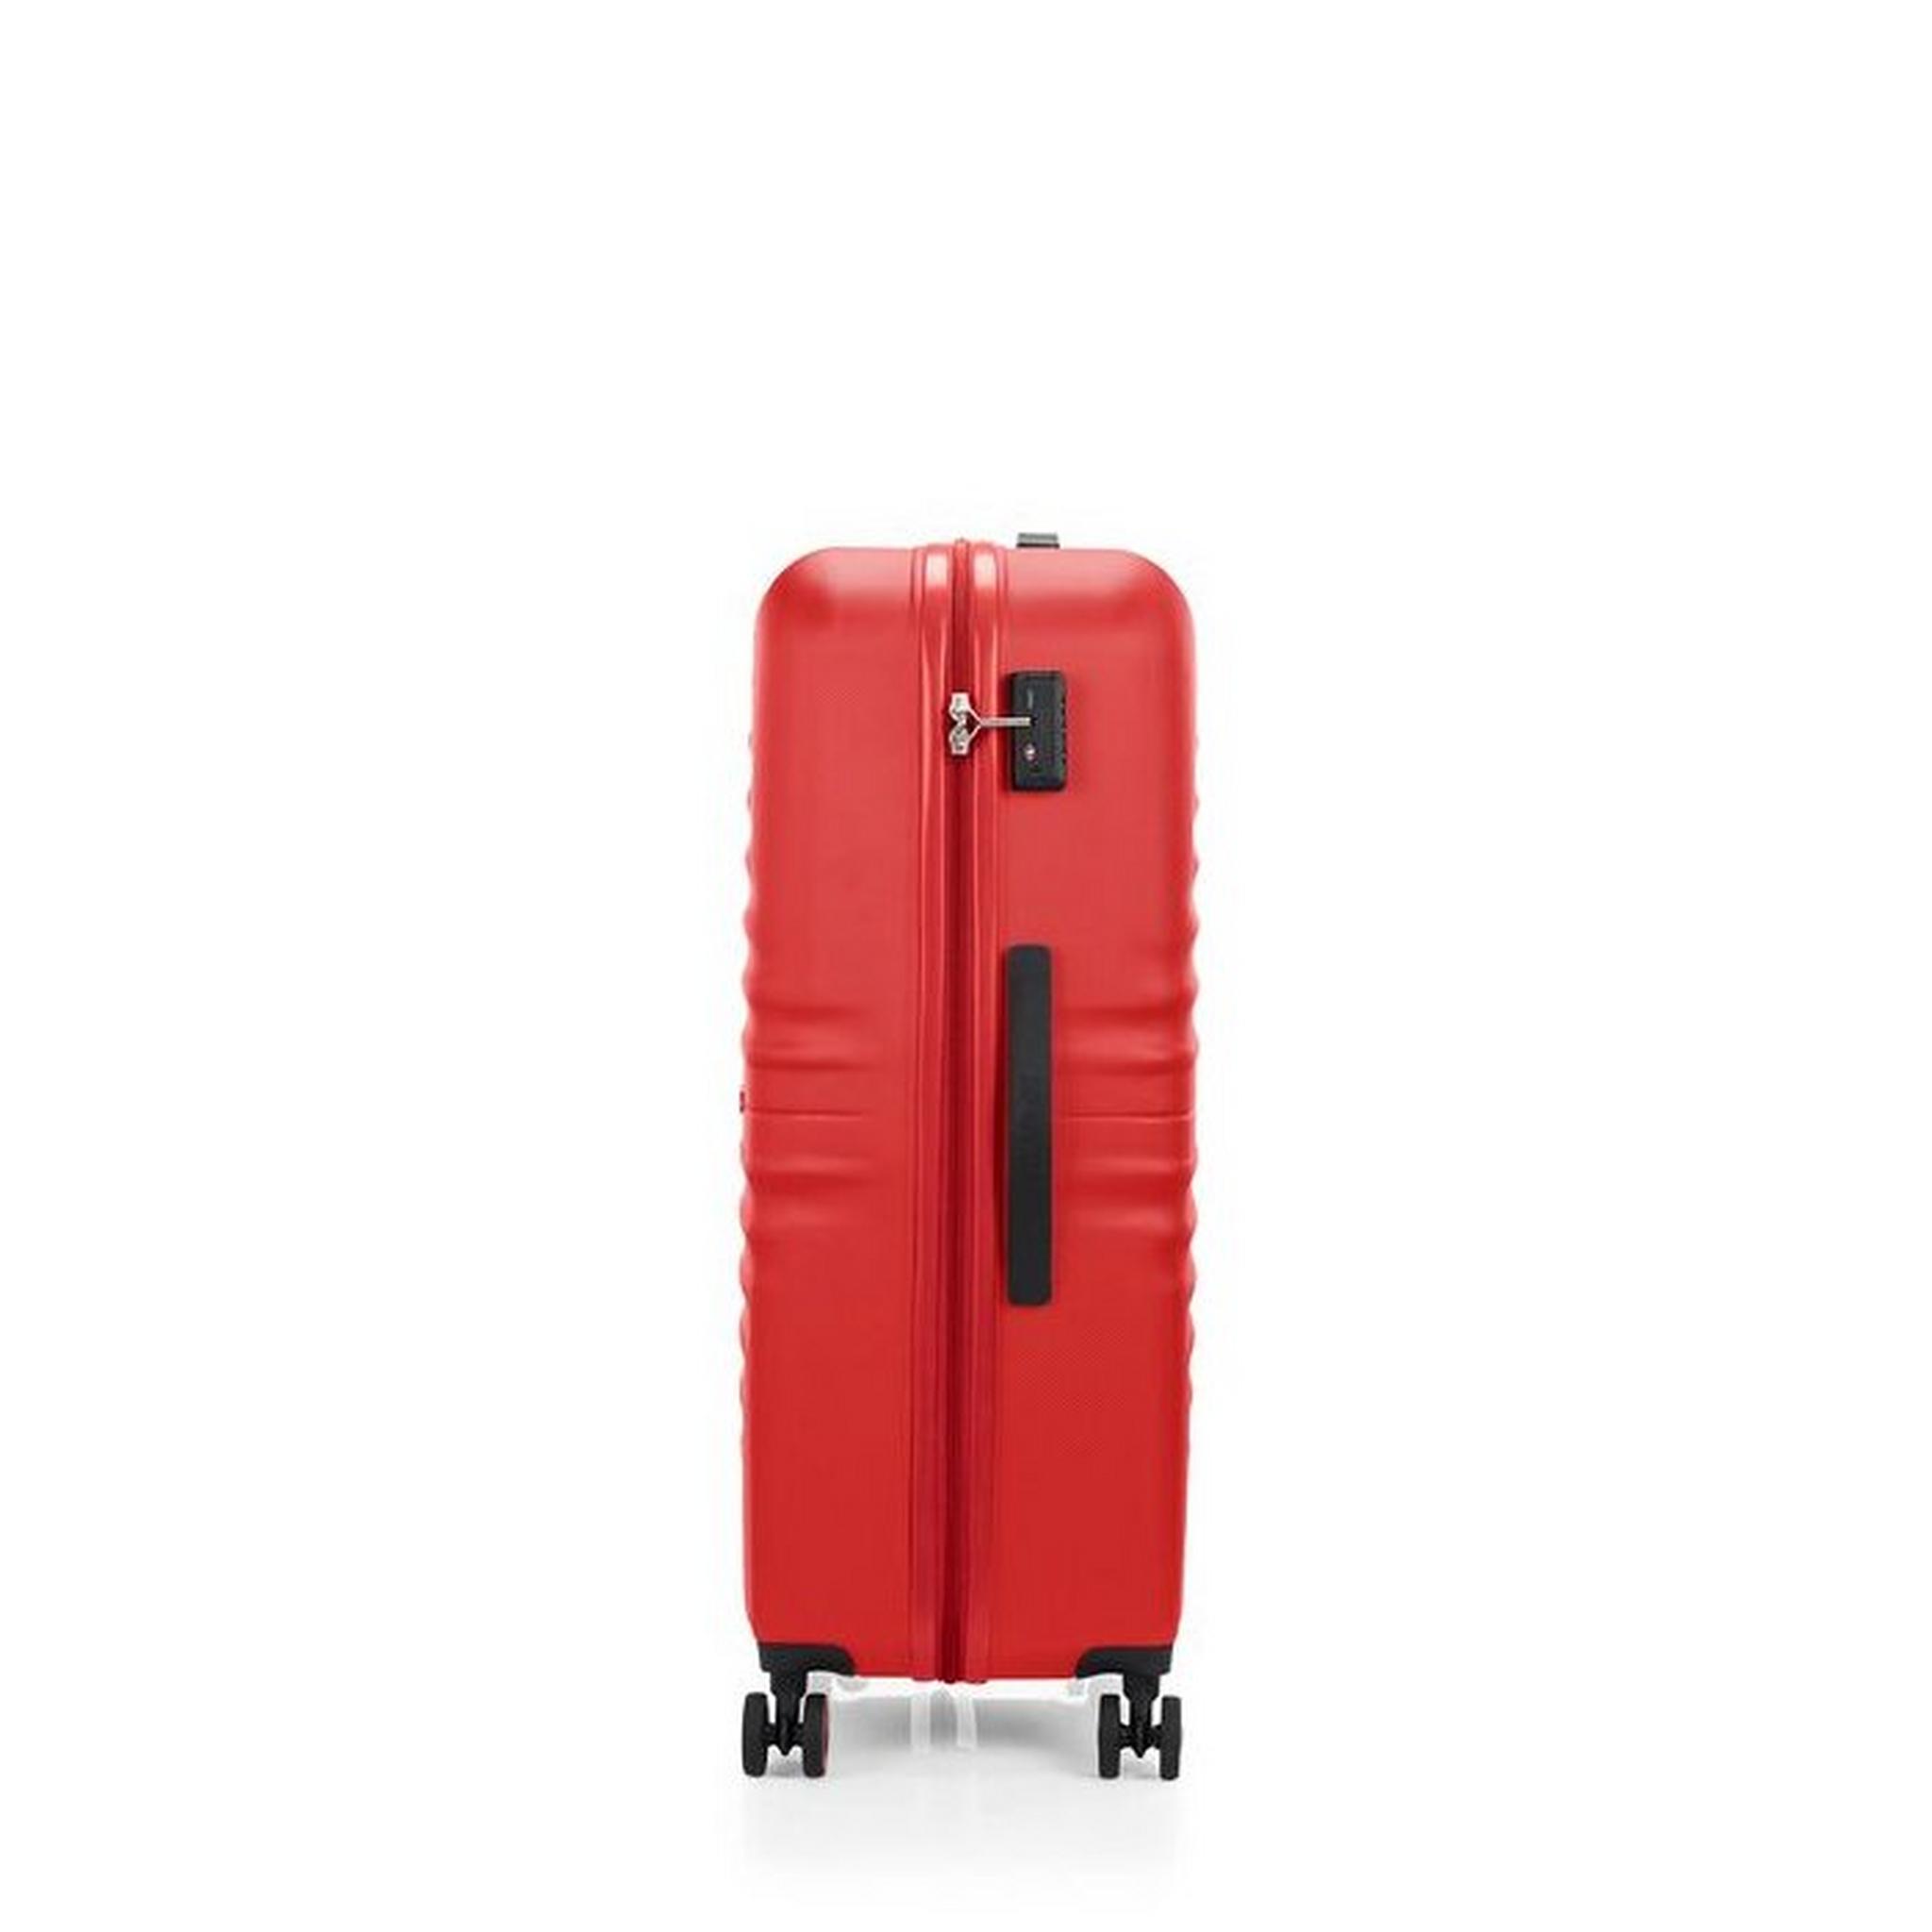 American Tourister Twist Wave Spinner 88CM Hard Luggage, QC6X00009 - Vivid Red